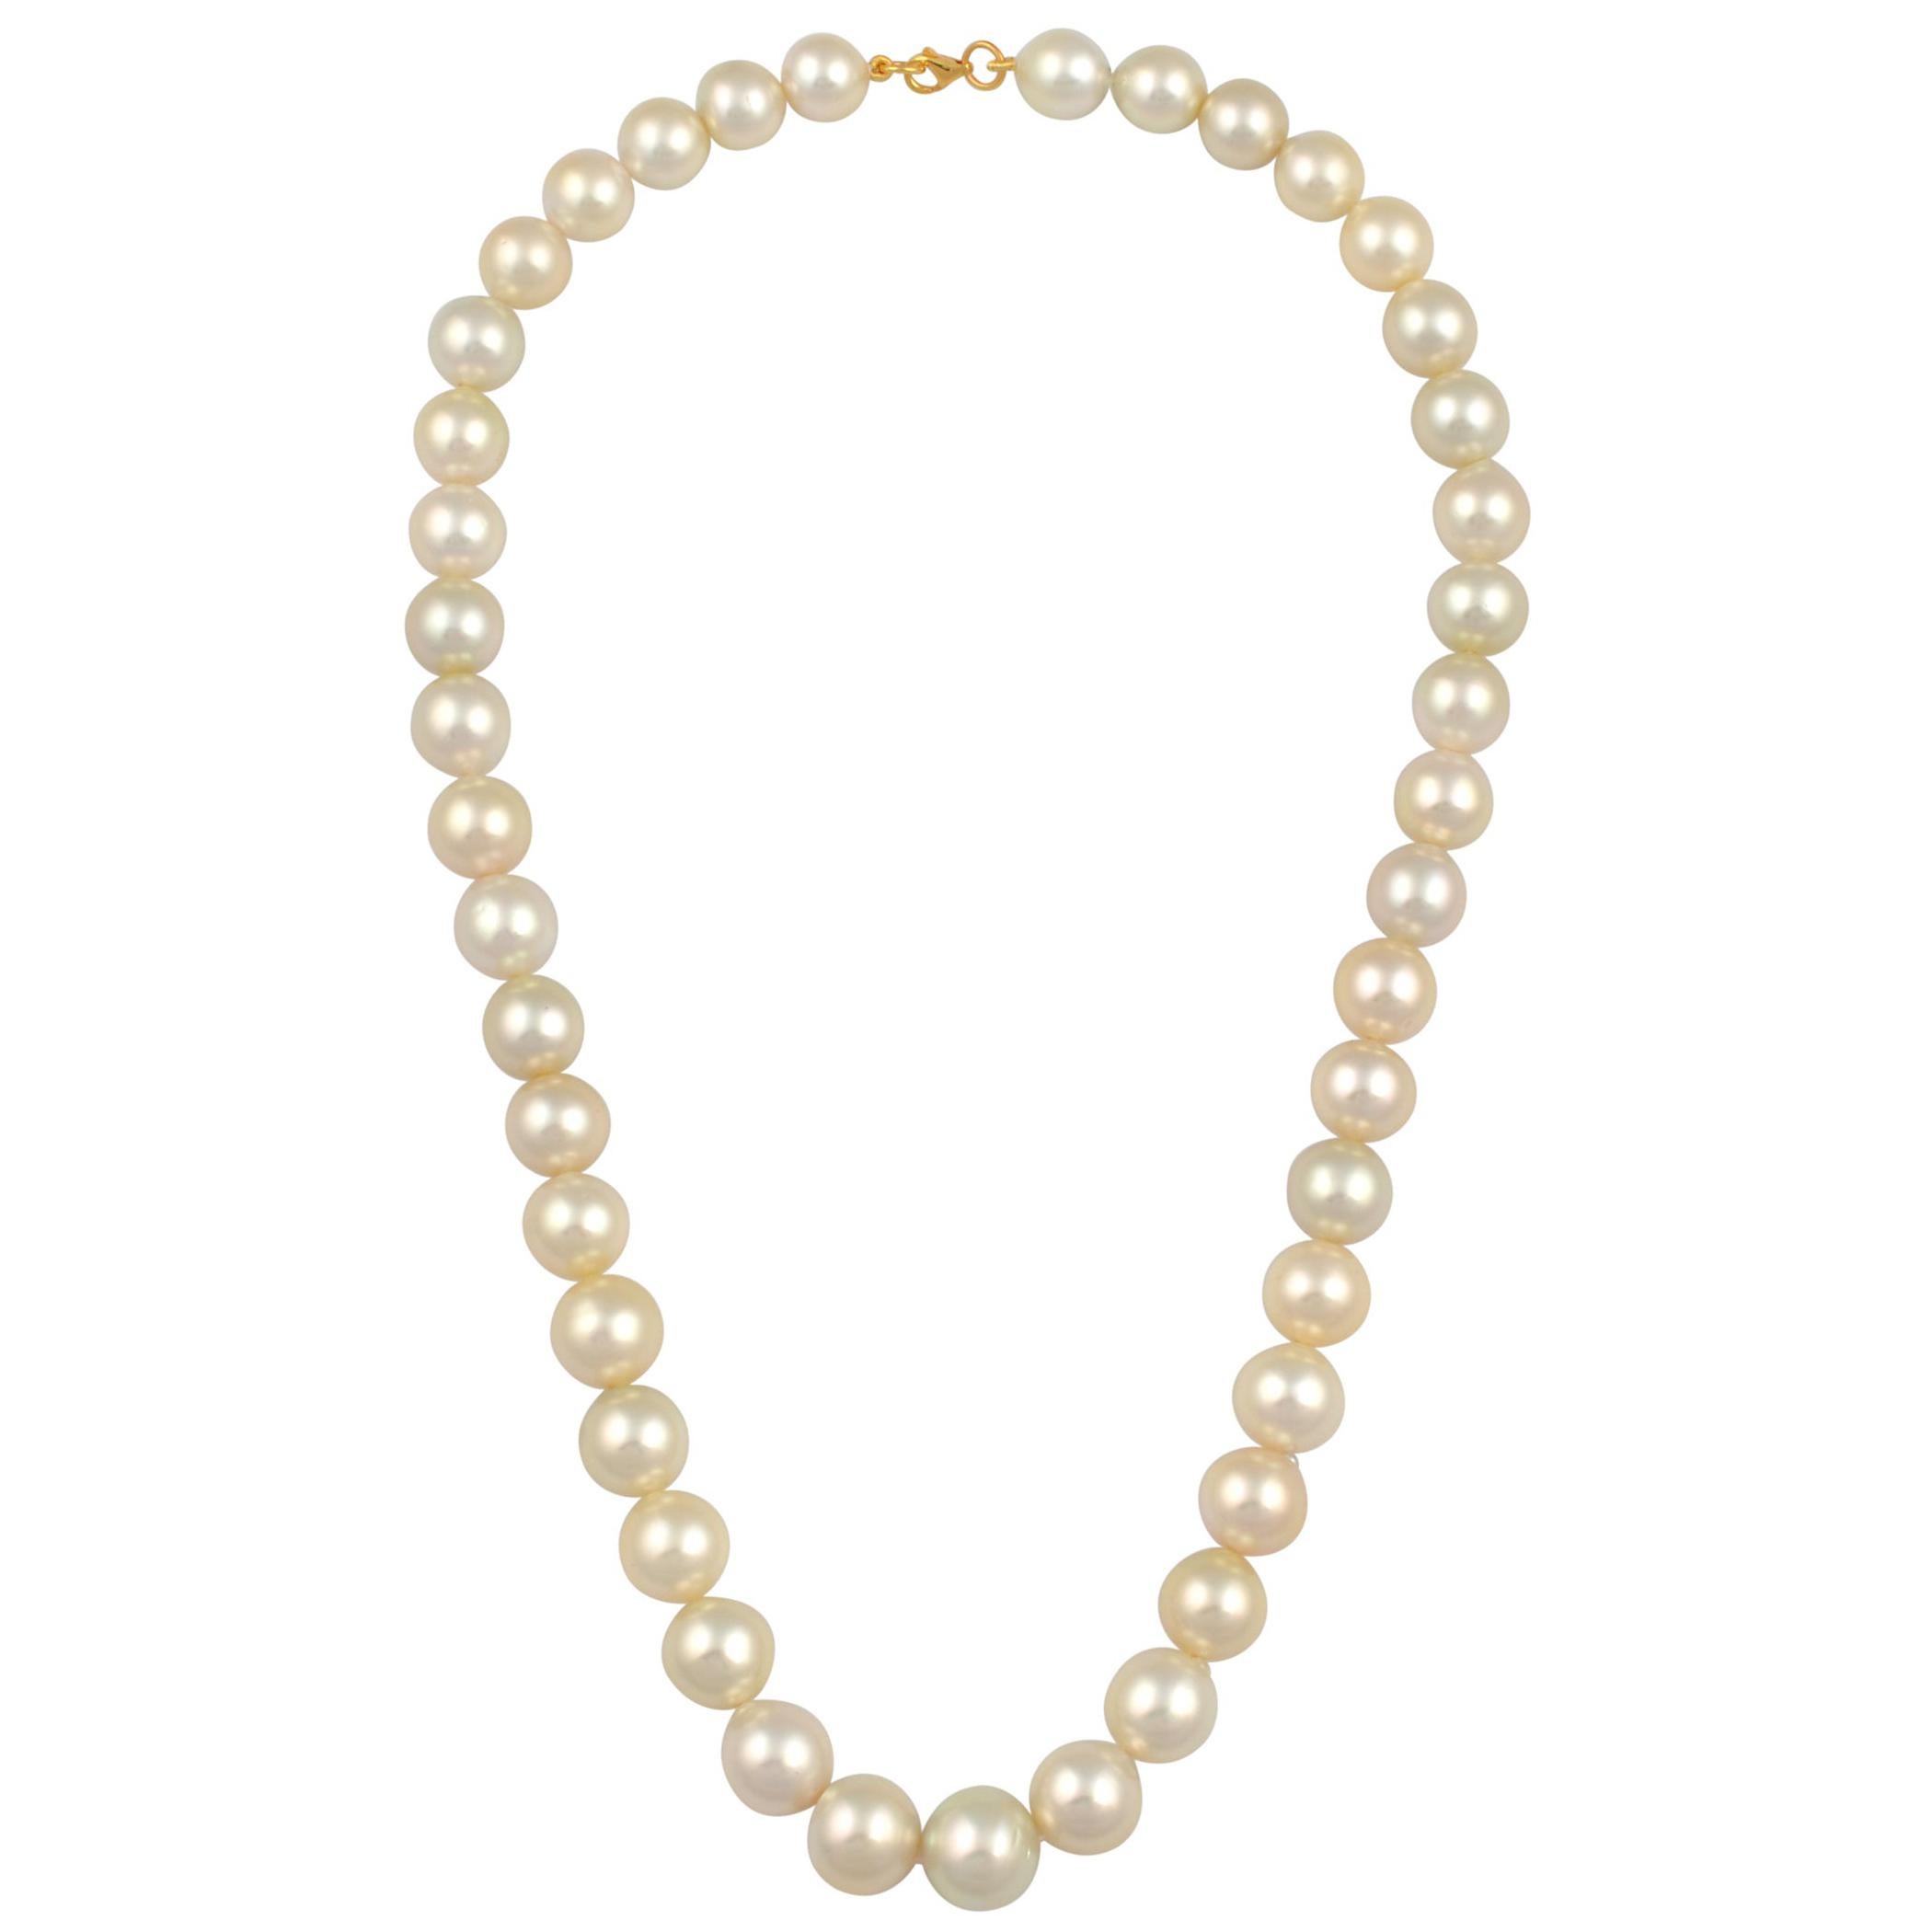 Graduating Cream Color South Sea Pearls Necklace 14 Karat Yellow Gold Clasp For Sale